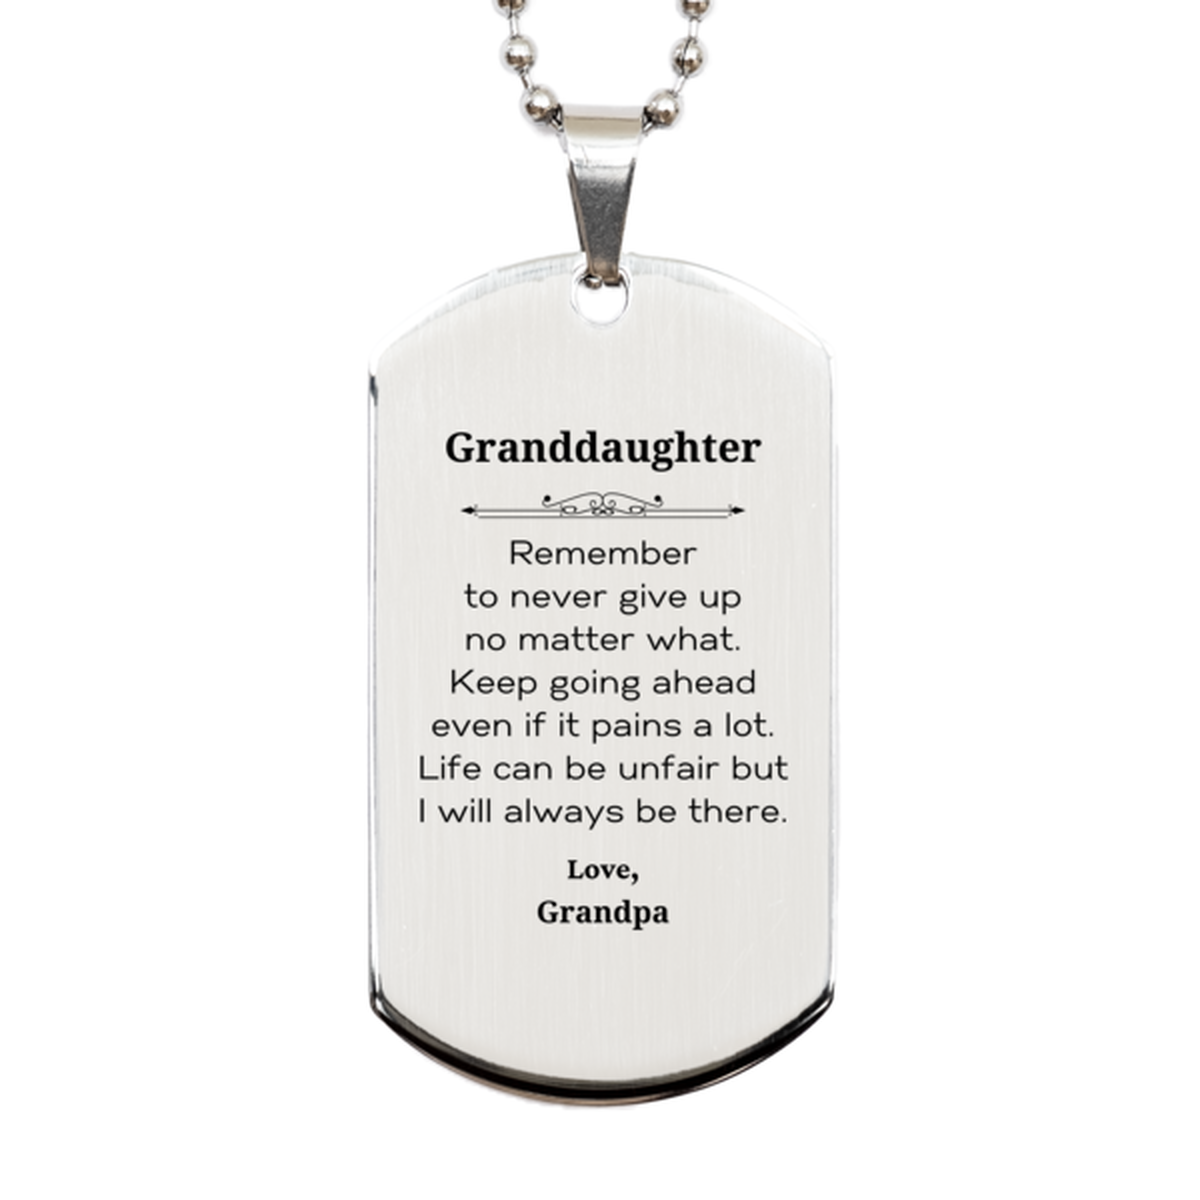 Granddaughter Motivational Gifts from Grandpa, Remember to never give up no matter what, Inspirational Birthday Silver Dog Tag for Granddaughter